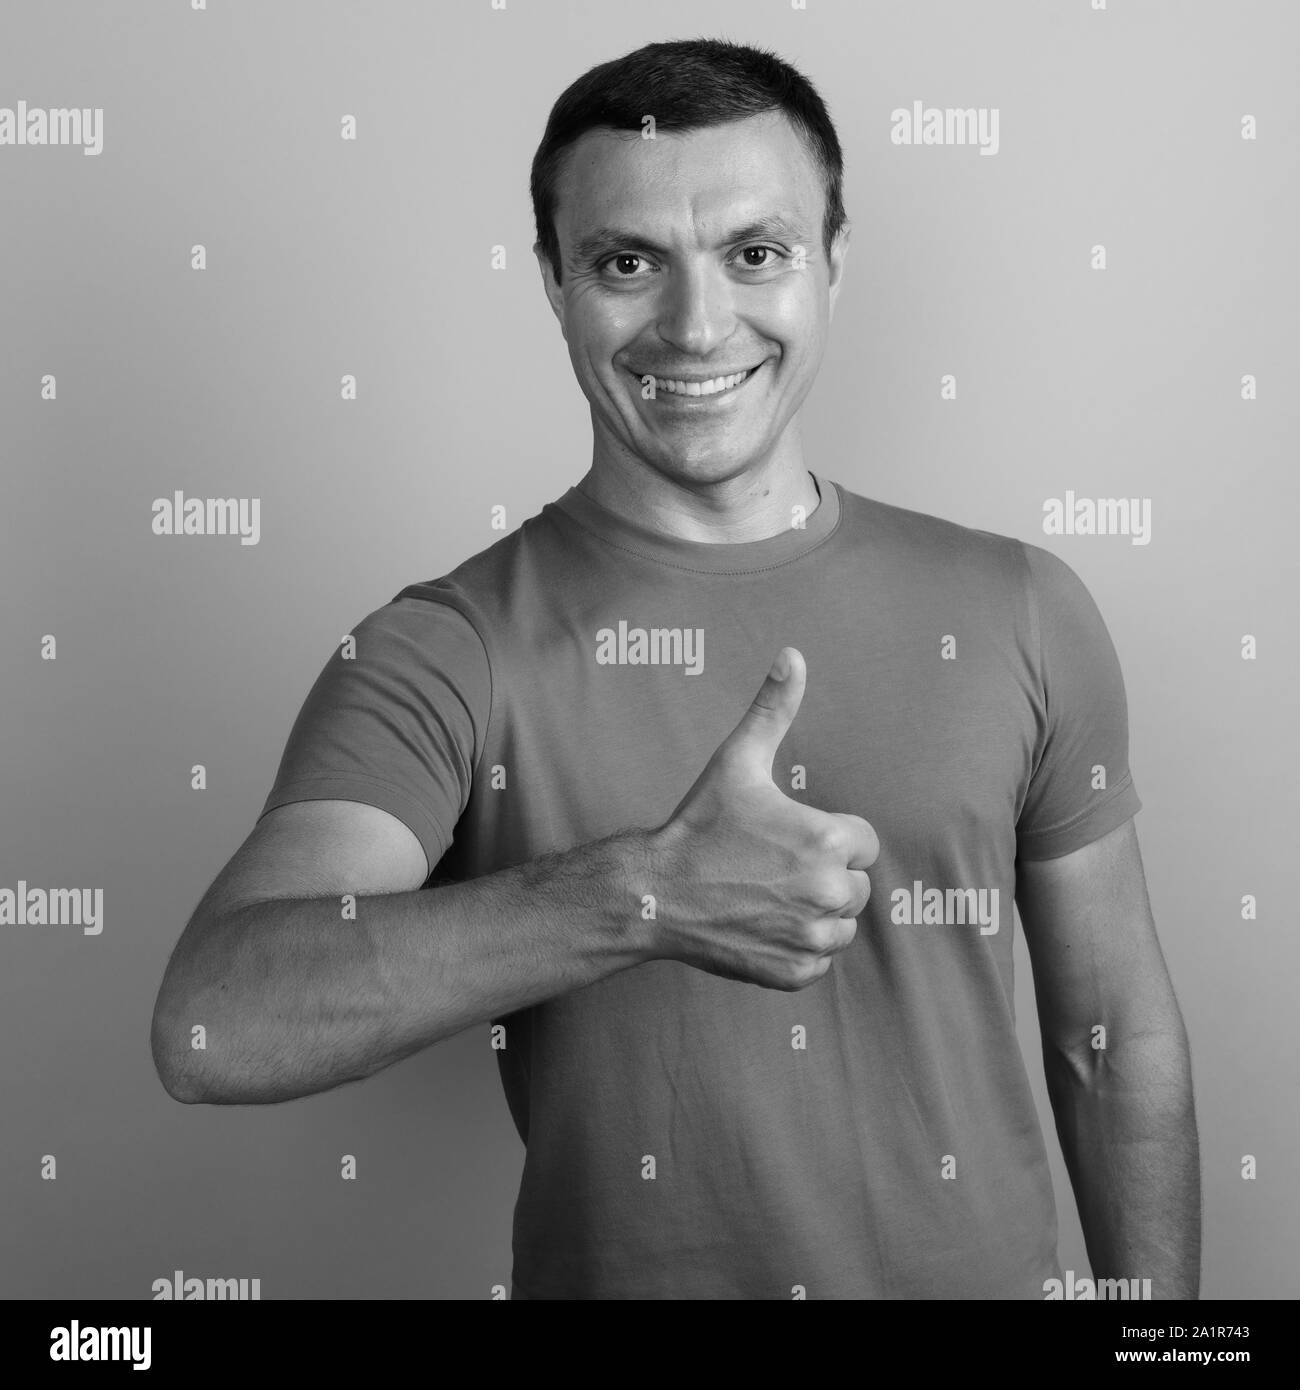 Man wearing t-shirt against gray background shot in black and white Stock Photo